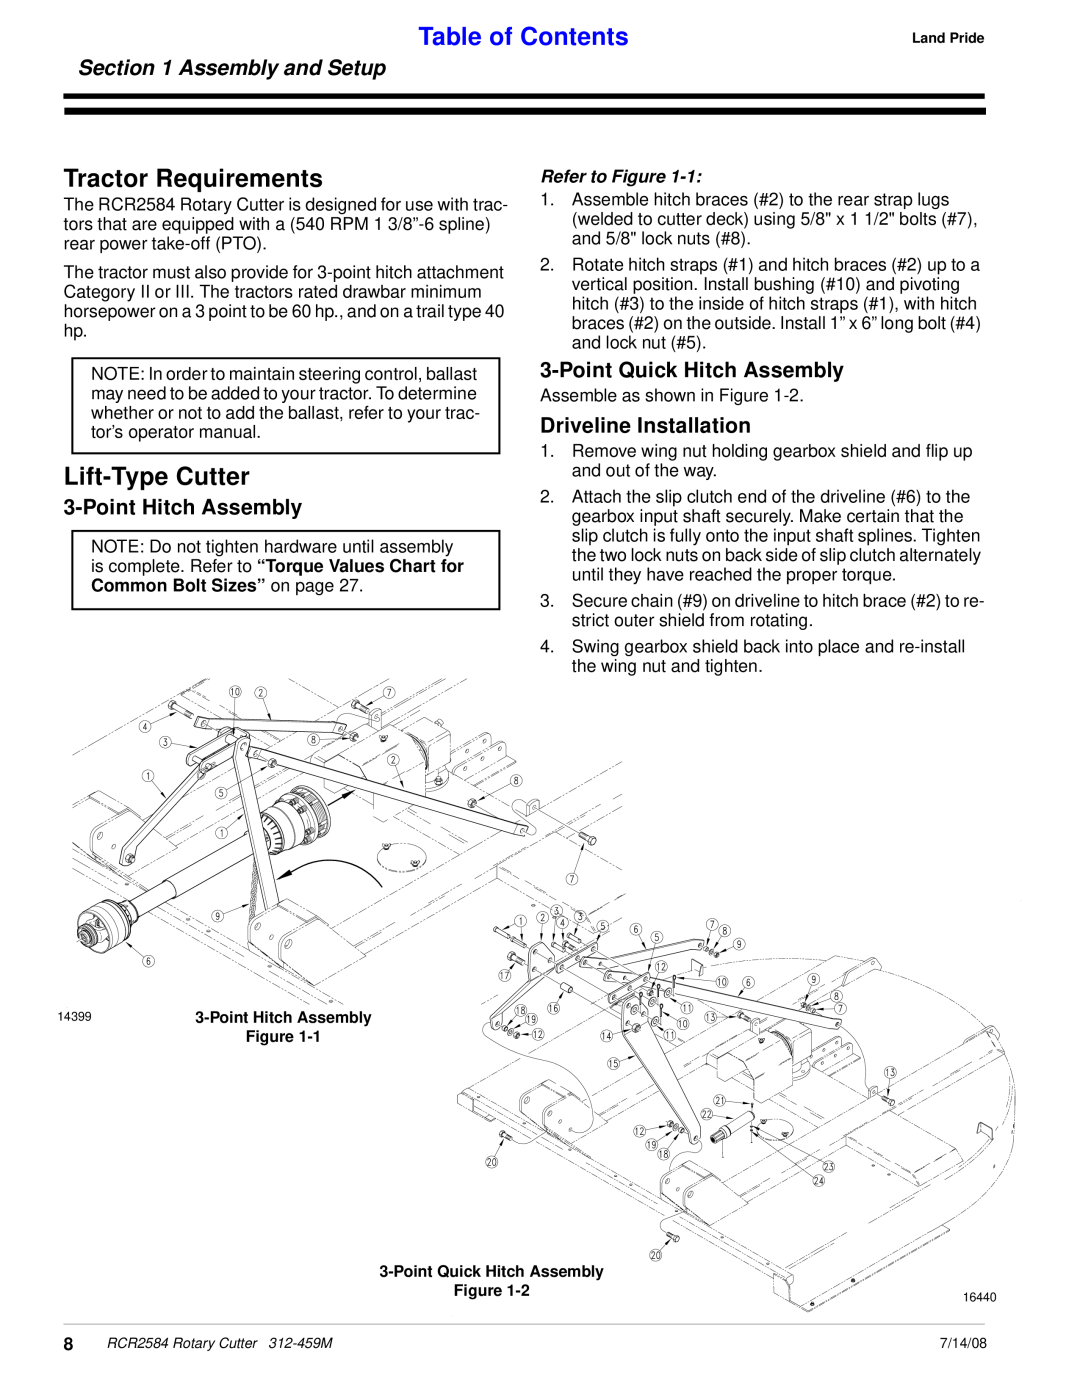 Land Pride RCR2584 manual Tractor Requirements, Lift-Type Cutter, Assembly and Setup, Point Hitch Assembly, Refer to Figure 